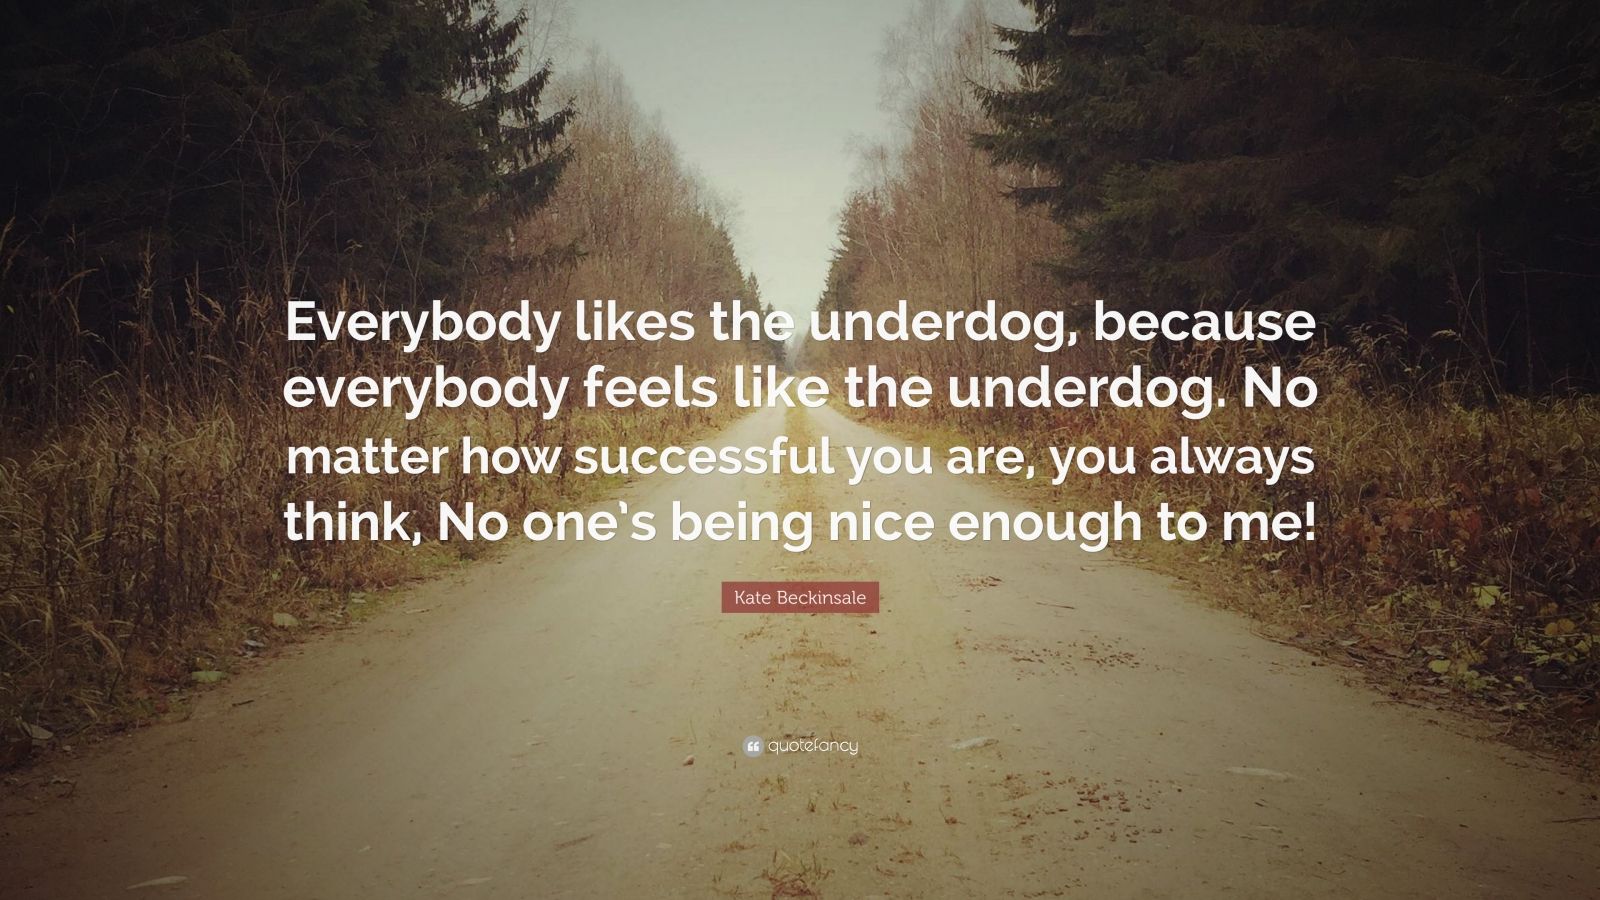 Kate Beckinsale Quote: “Everybody likes the underdog, because everybody